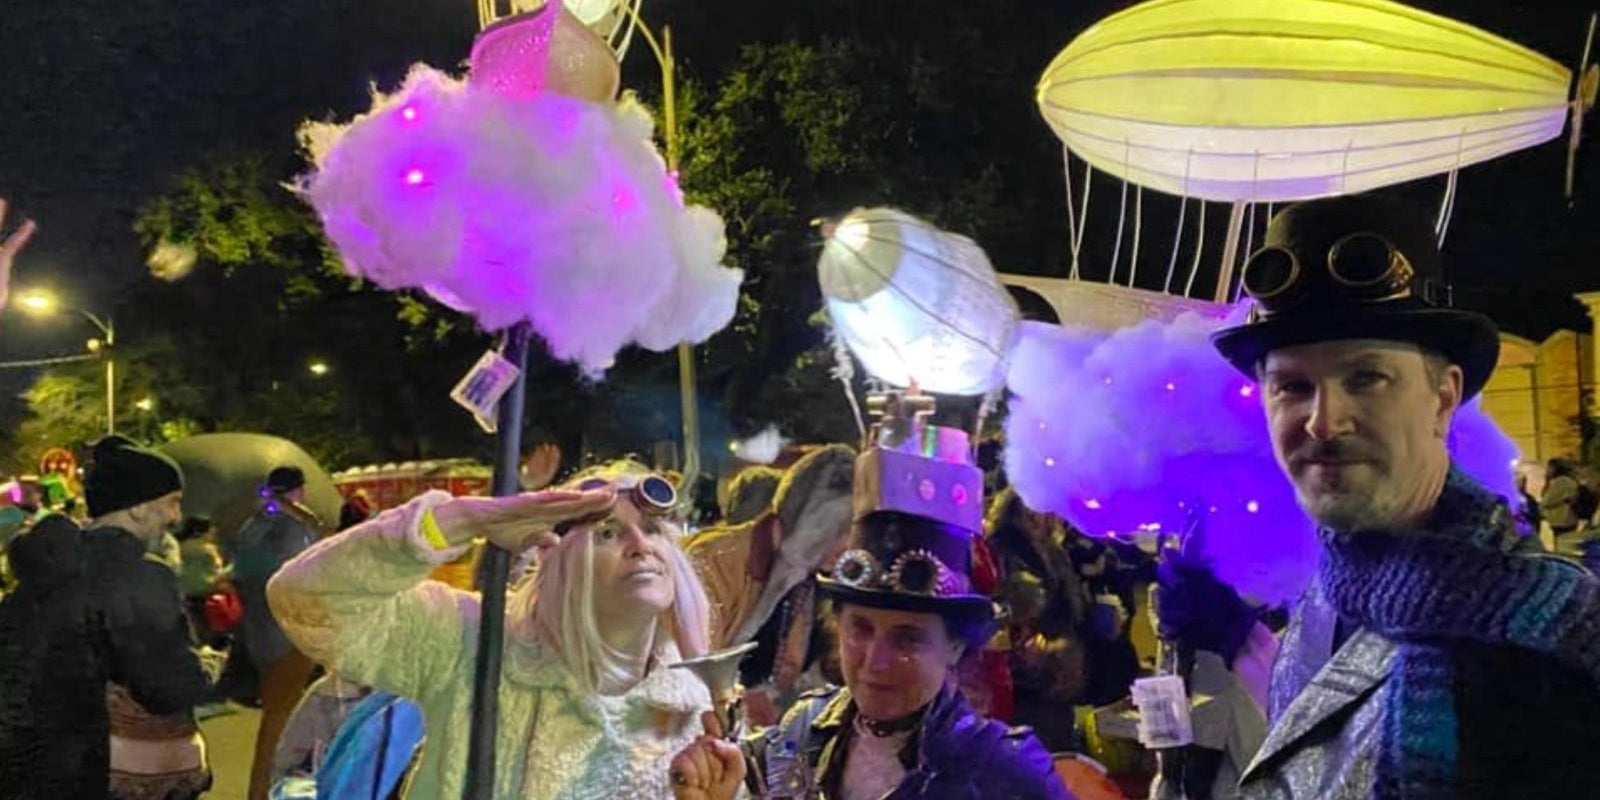 Mardi Gras in New Orleans with our newest PLAYLIST! - Coveralls